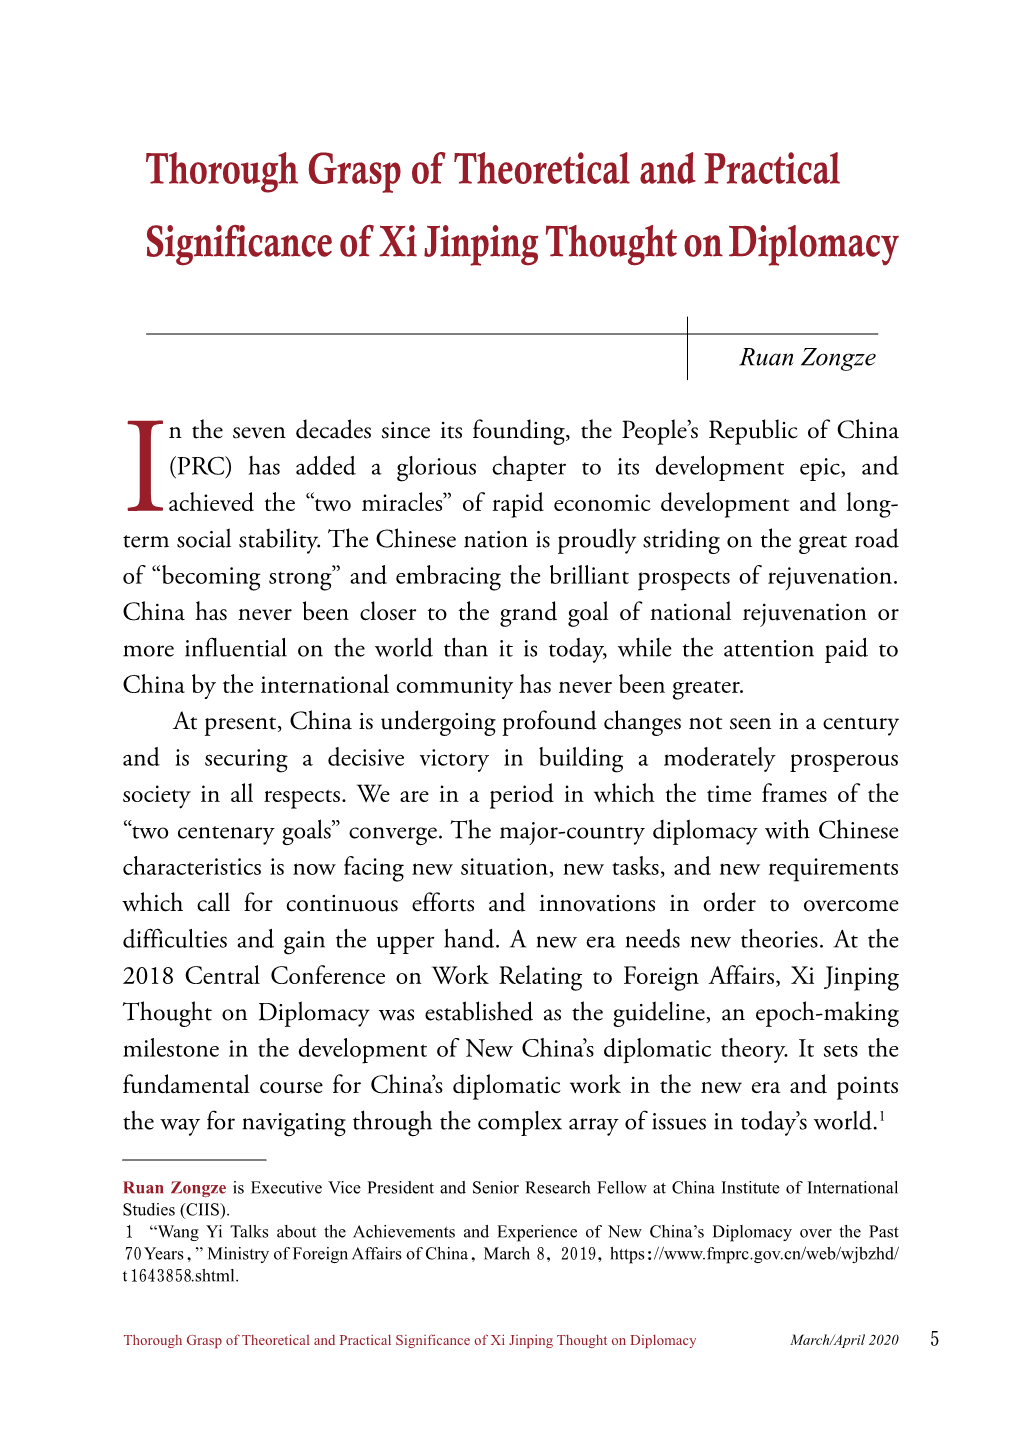 Thorough Grasp of Theoretical and Practical Significance of Xi Jinping Thought on Diplomacy